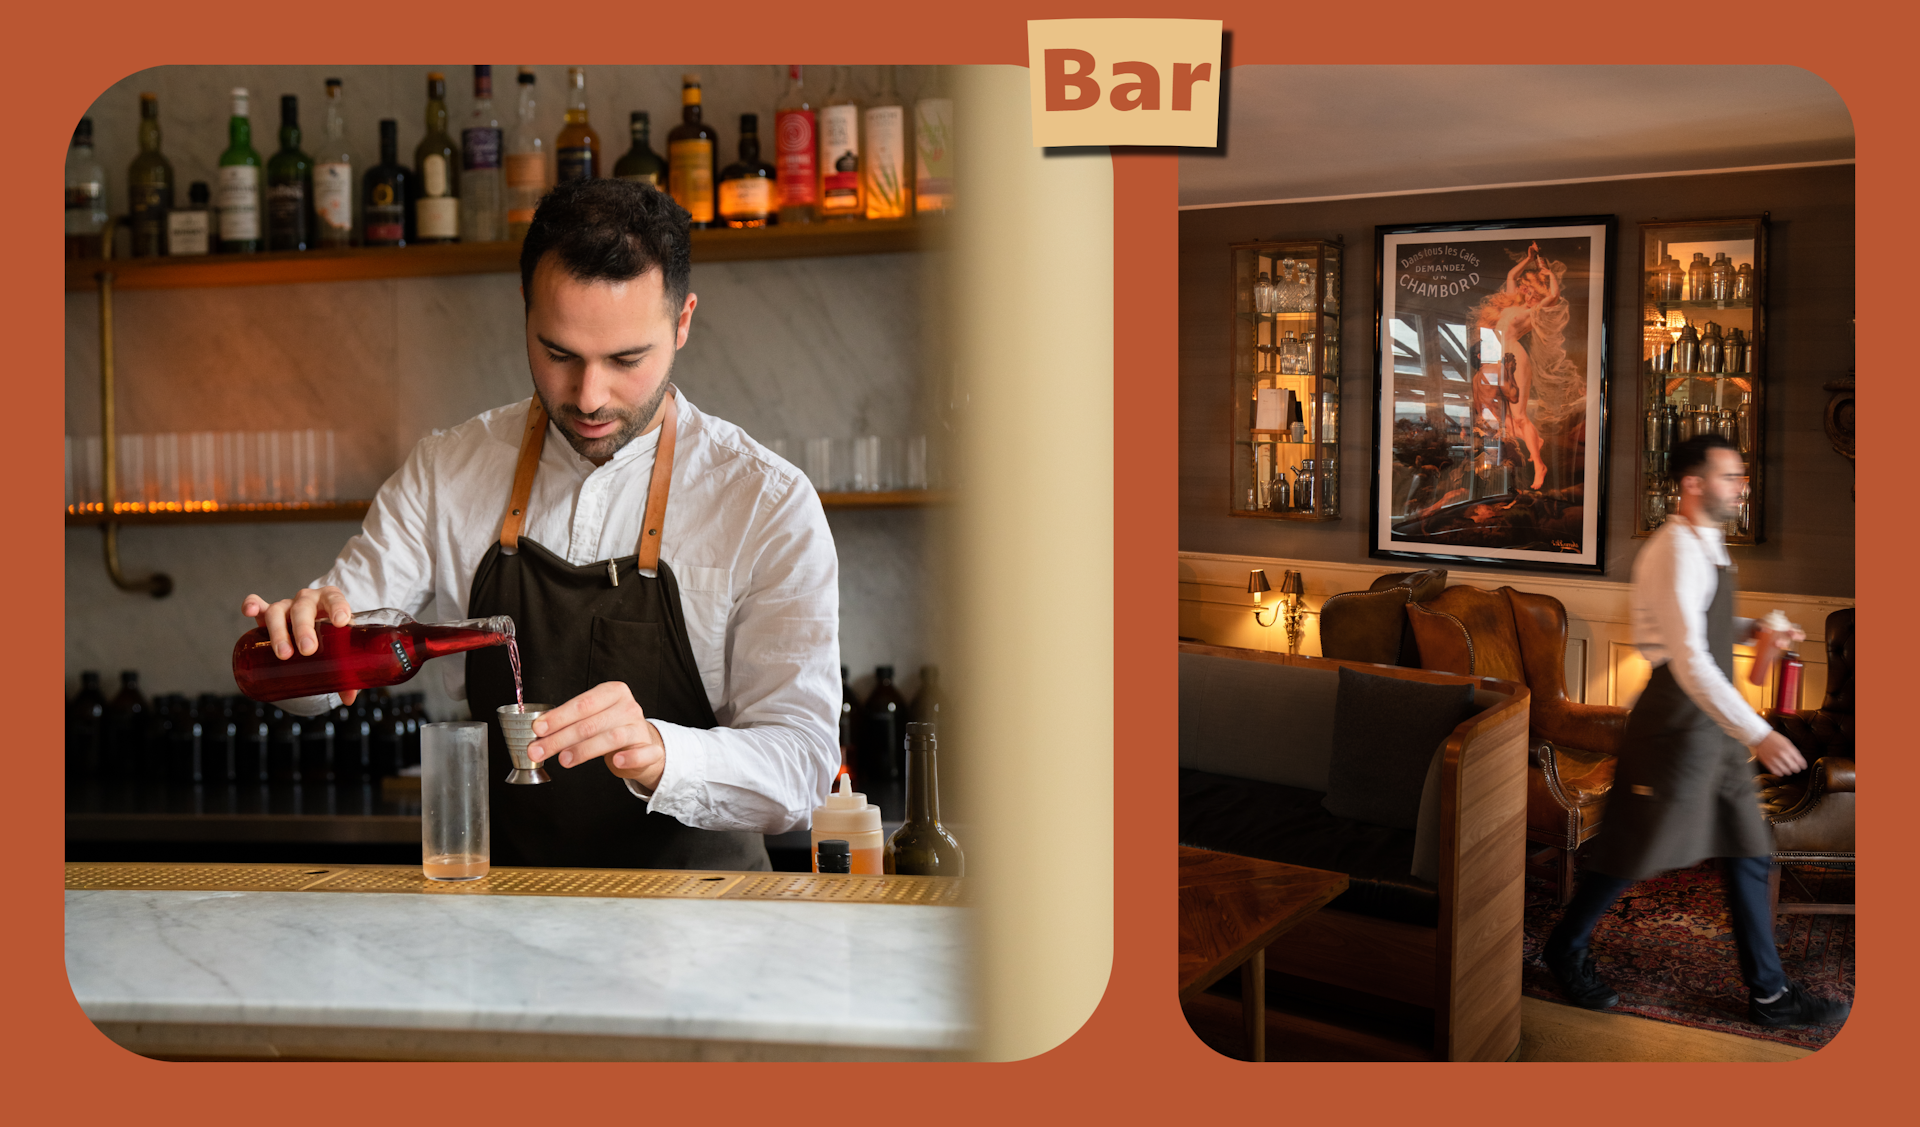 Left image shows a barman pouring a cocktail behind a bar. Right image shows the same barman walking through the dimly-lit interior or Rudy's cocktail bar